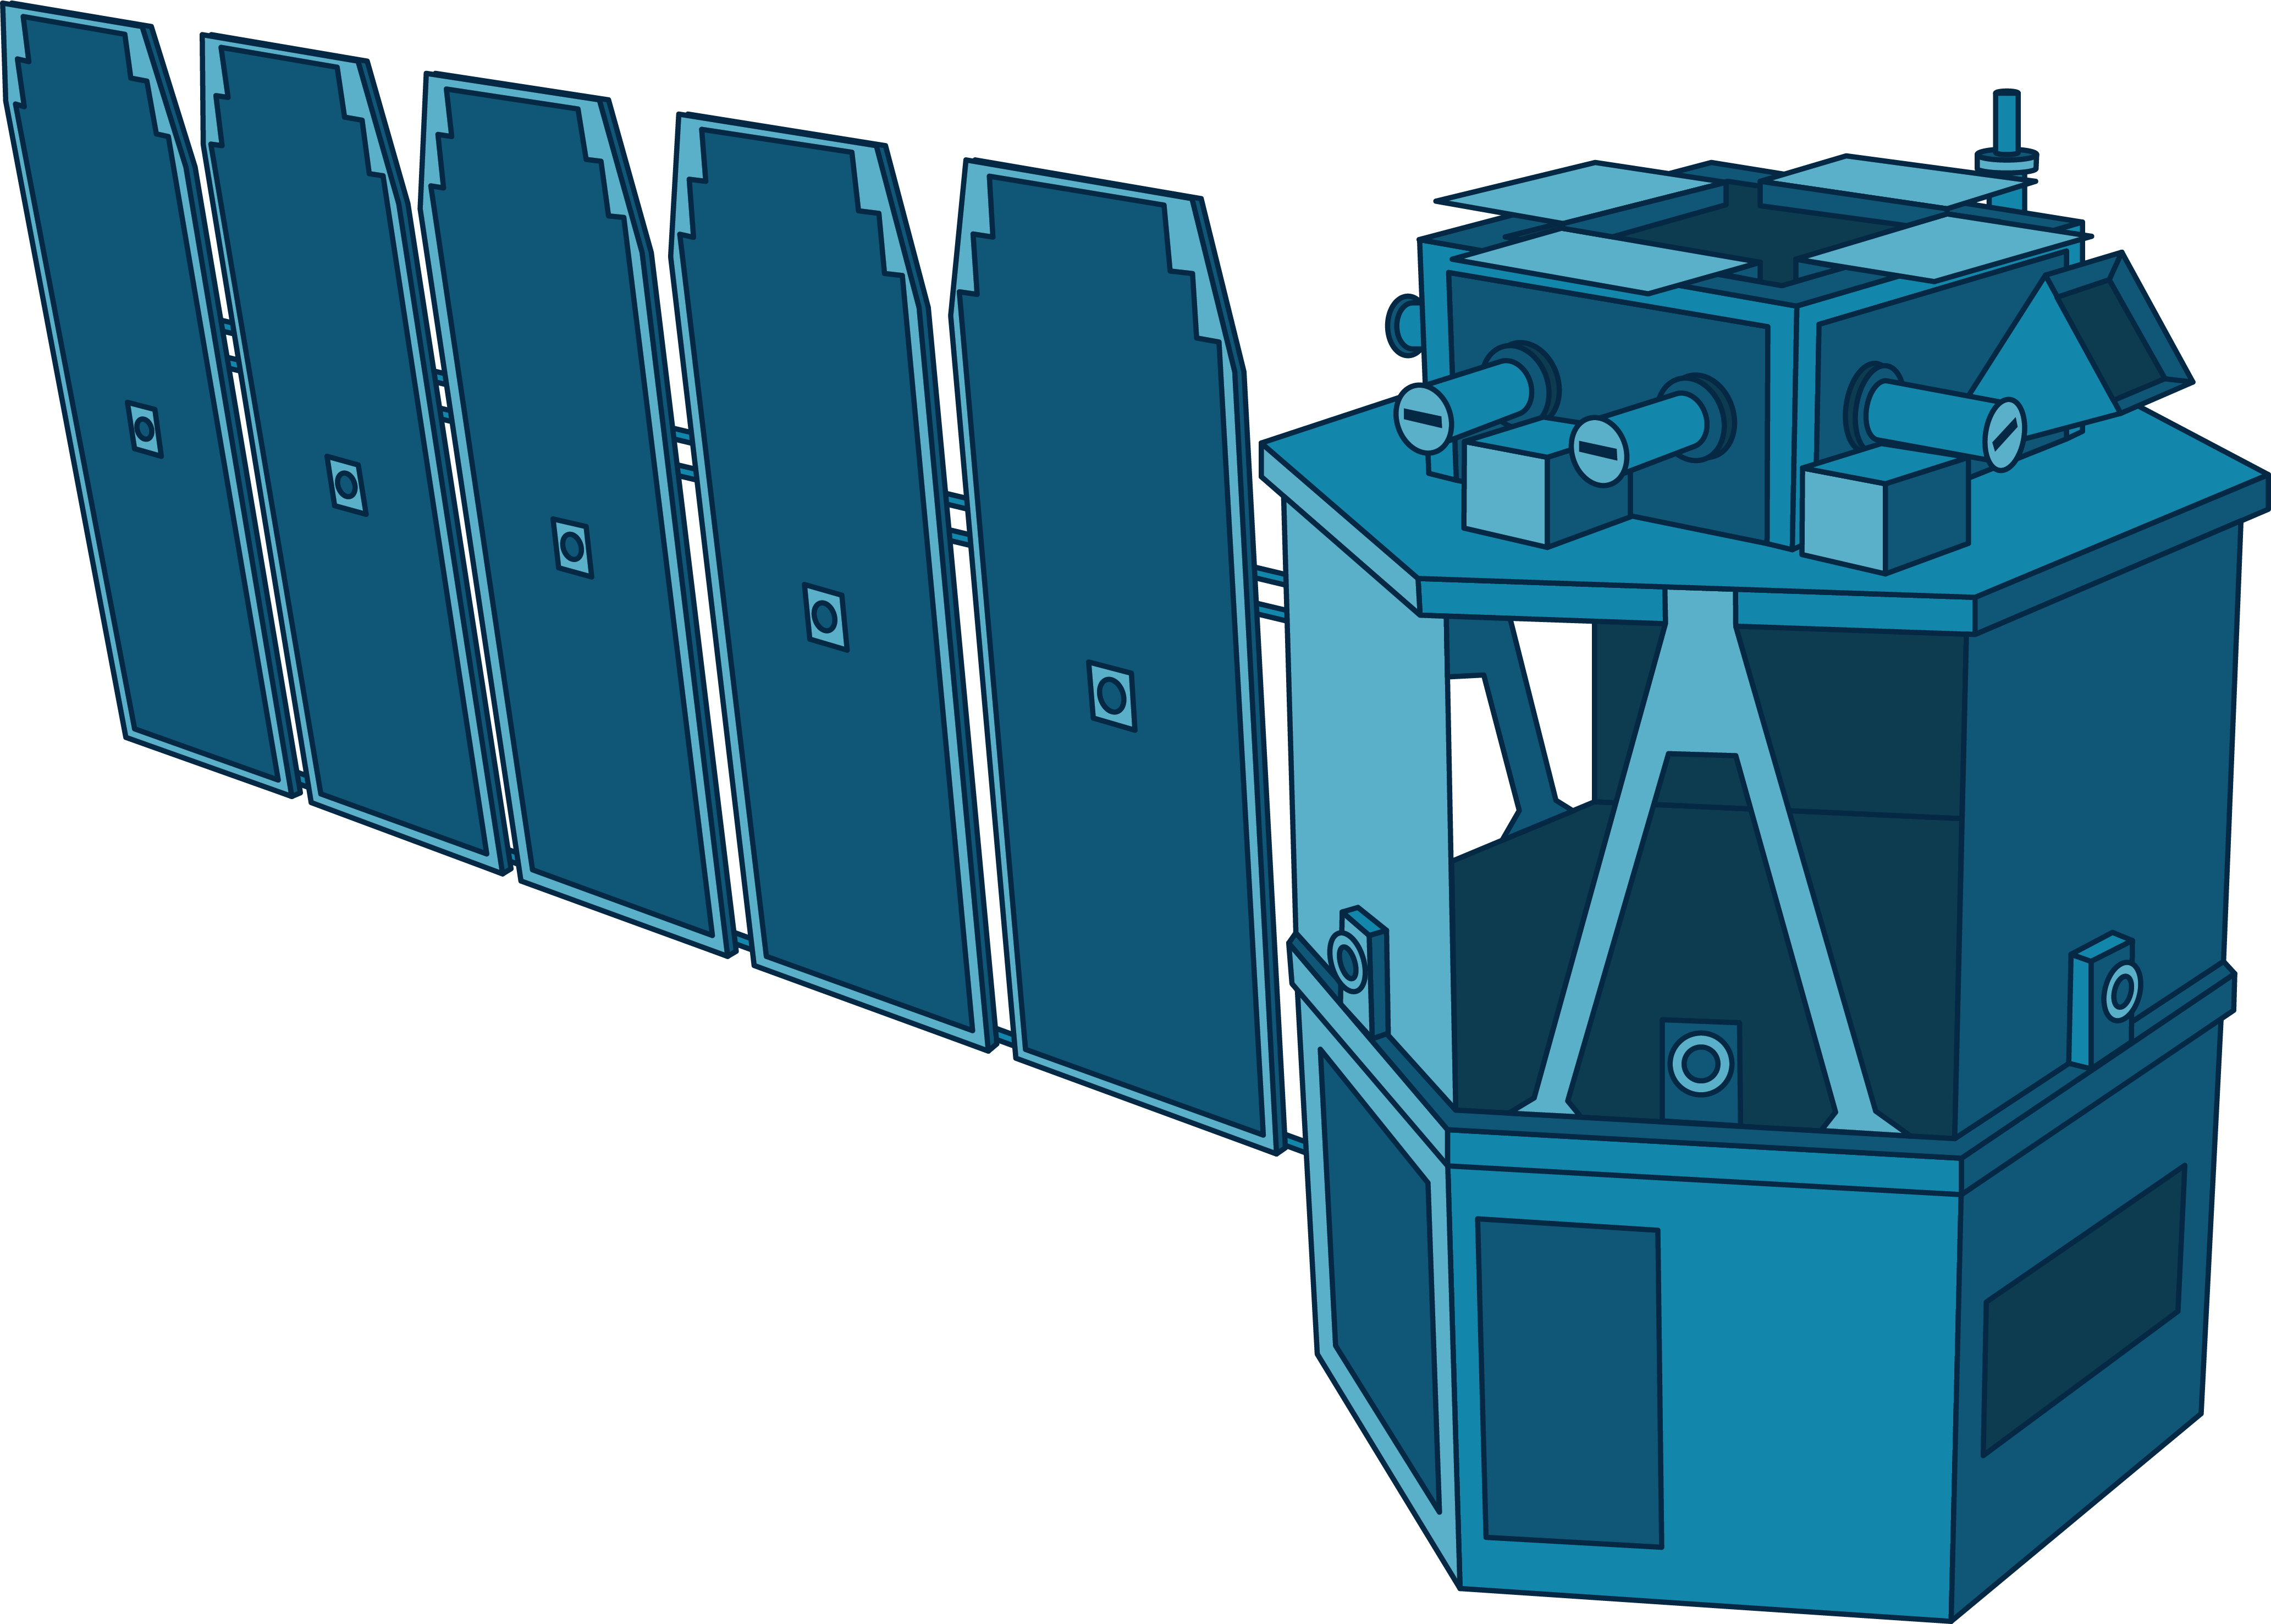 COSI is illustrated in light and dark blues. The spacecraft has a hexagonal body topped with a box with various attachments. One solar panel extends to the left side of the satellite’s body.